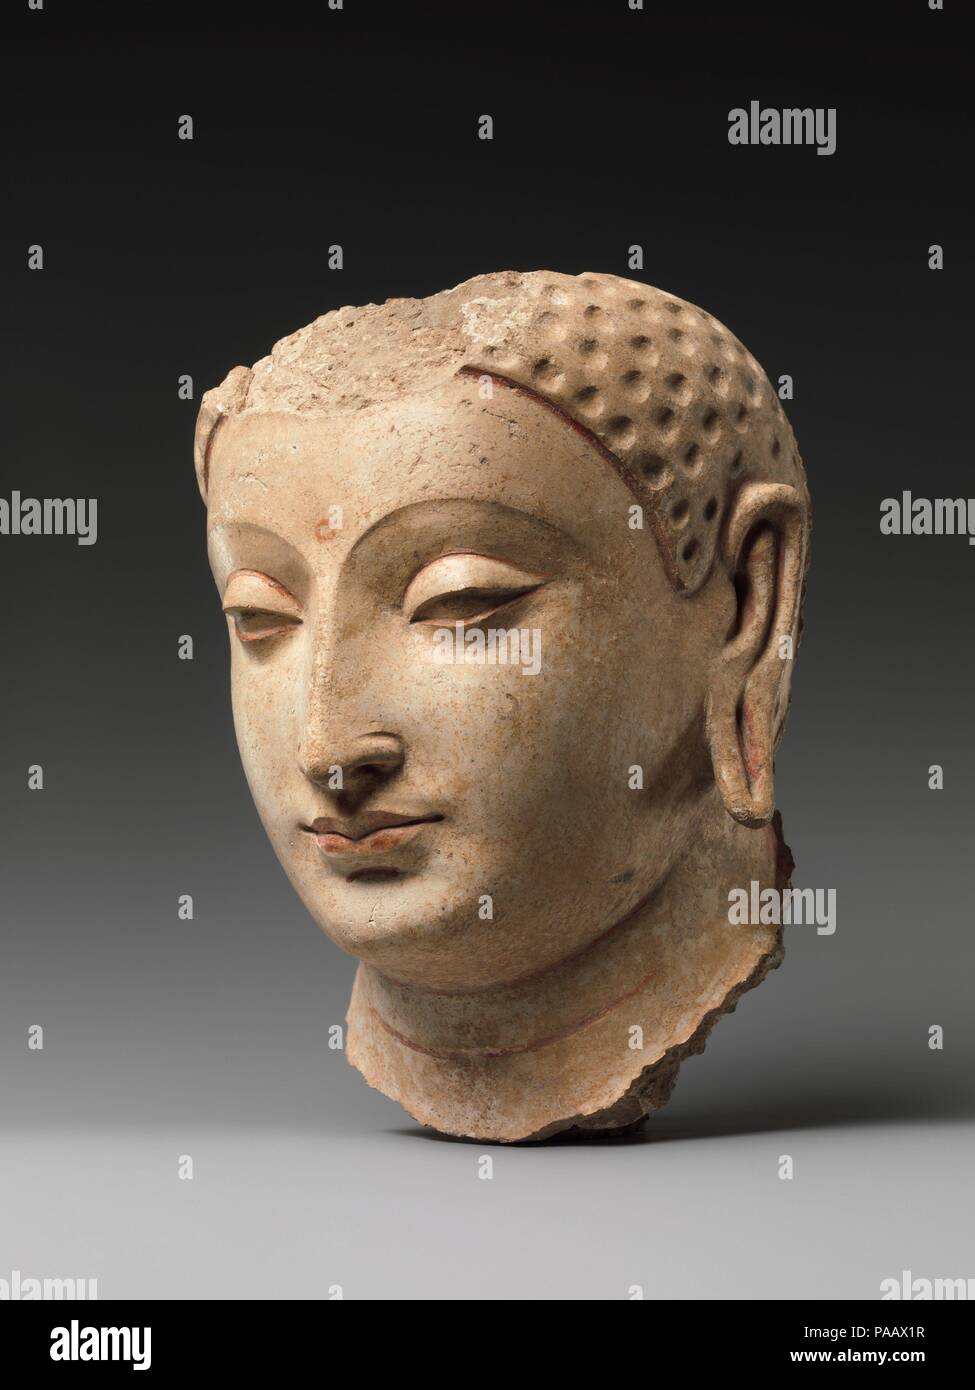 Head of Buddha. Culture: Afghanistan (probably Hadda). Dimensions: H. 7 1/4 in. (18.4 cm). Date: 5th-6th century.  The well-preserved surface and traces of paint provide an idea of what this head looked like when it was being used in worship. The abstracted treatment of the eyes and the intersecting plains defining forehead, eyebrows, and nose are stylistic features shared with imagery produced in north India during the Gupta period. The fact that this north Indian way of presenting the Buddha had penetrated into Afghanistan suggests a shared Buddhist tradition. Museum: Metropolitan Museum of  Stock Photo